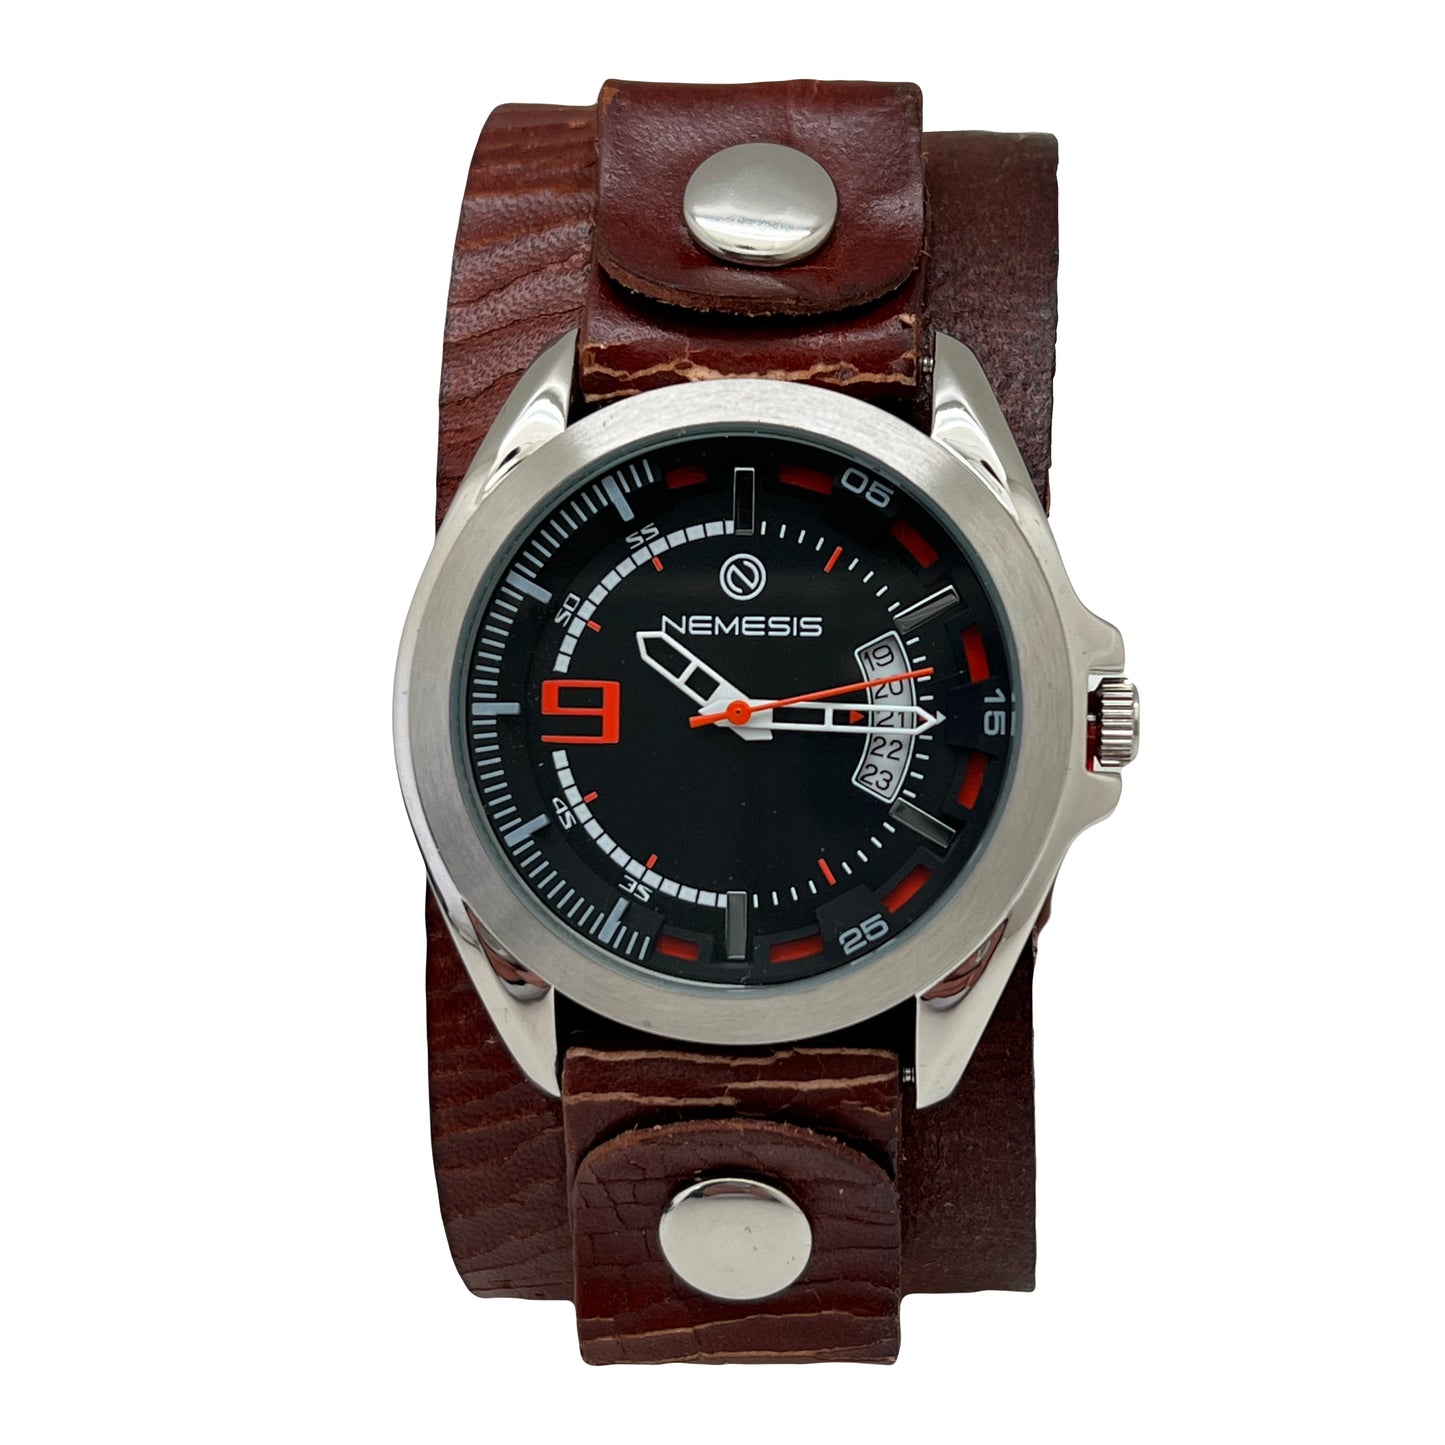 Sully Black/Orange Watch with Wrinkled Dark Brown Leather Cuff